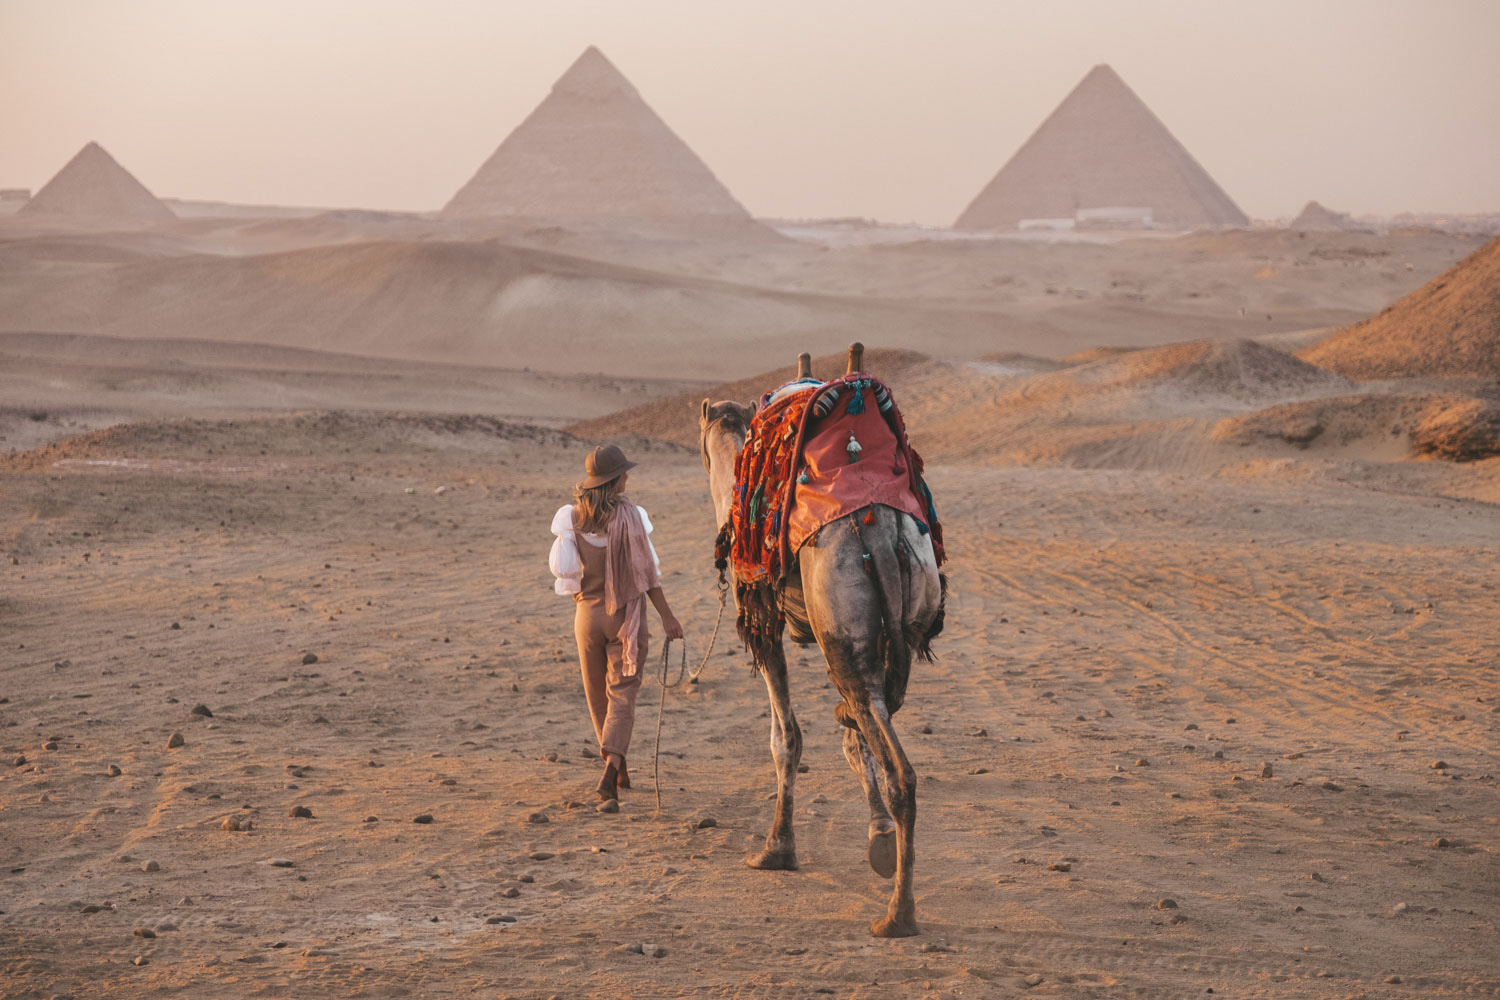 travelling to egypt in april